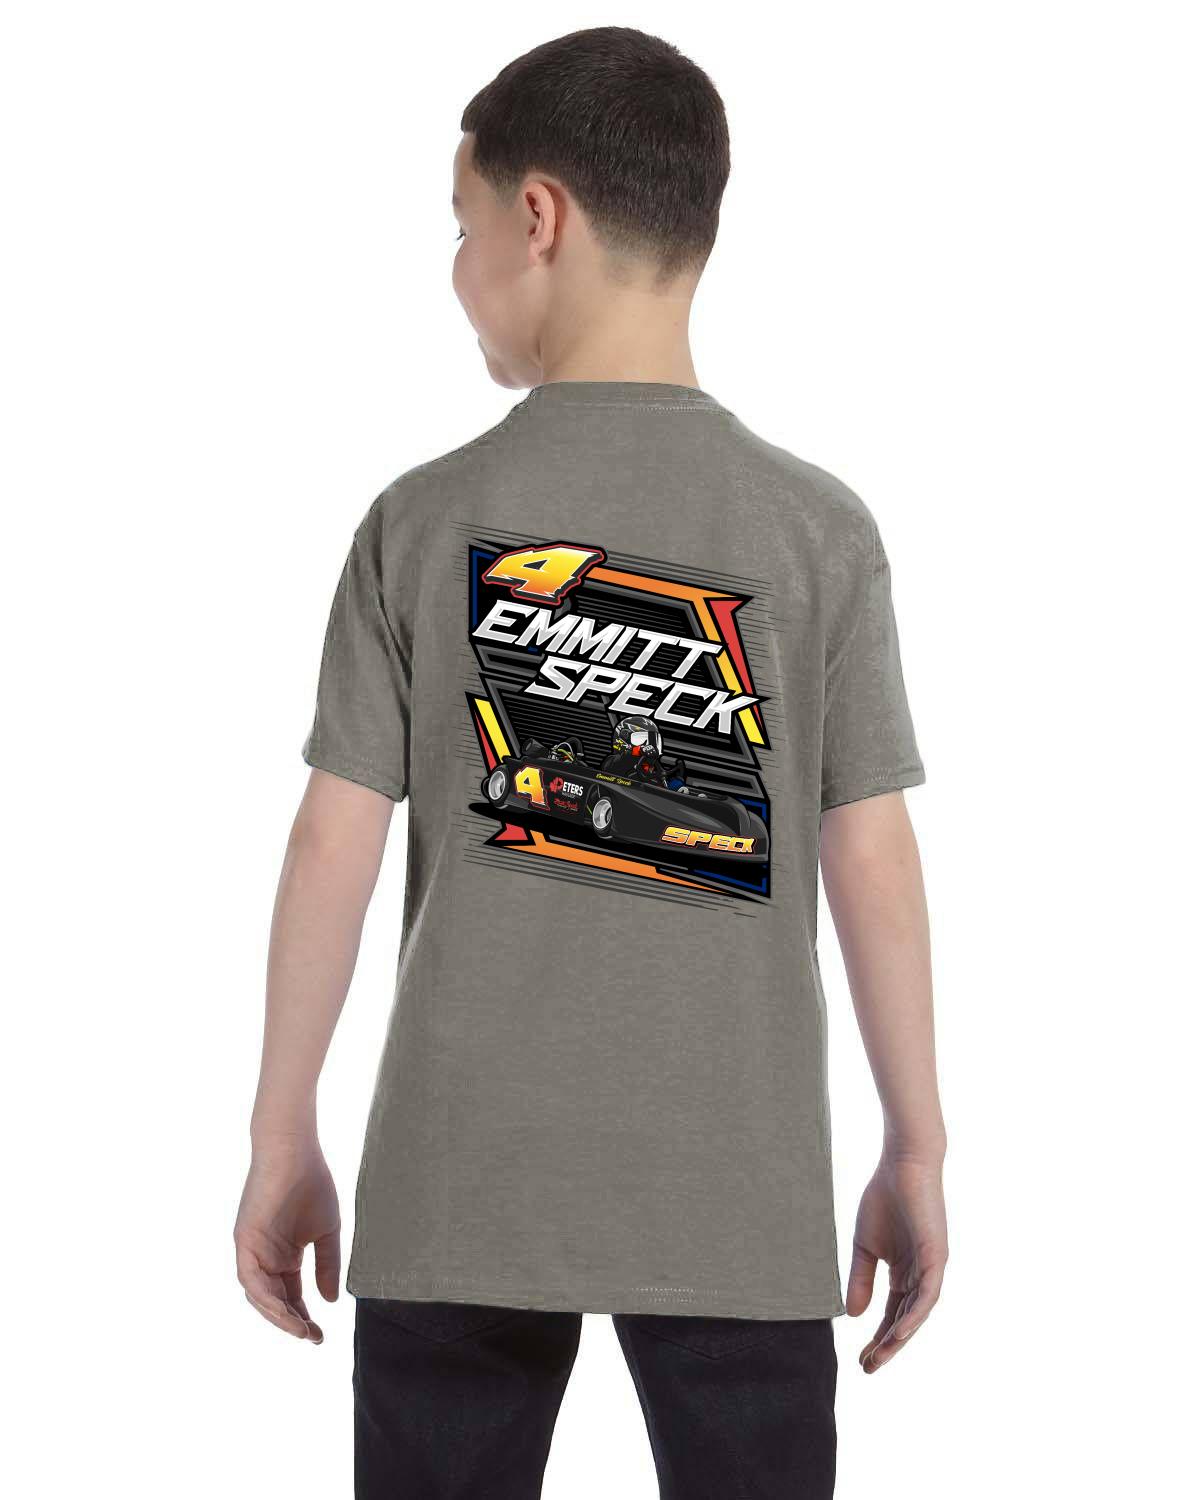 Emmit Speck Racing Youth  T-Shirt